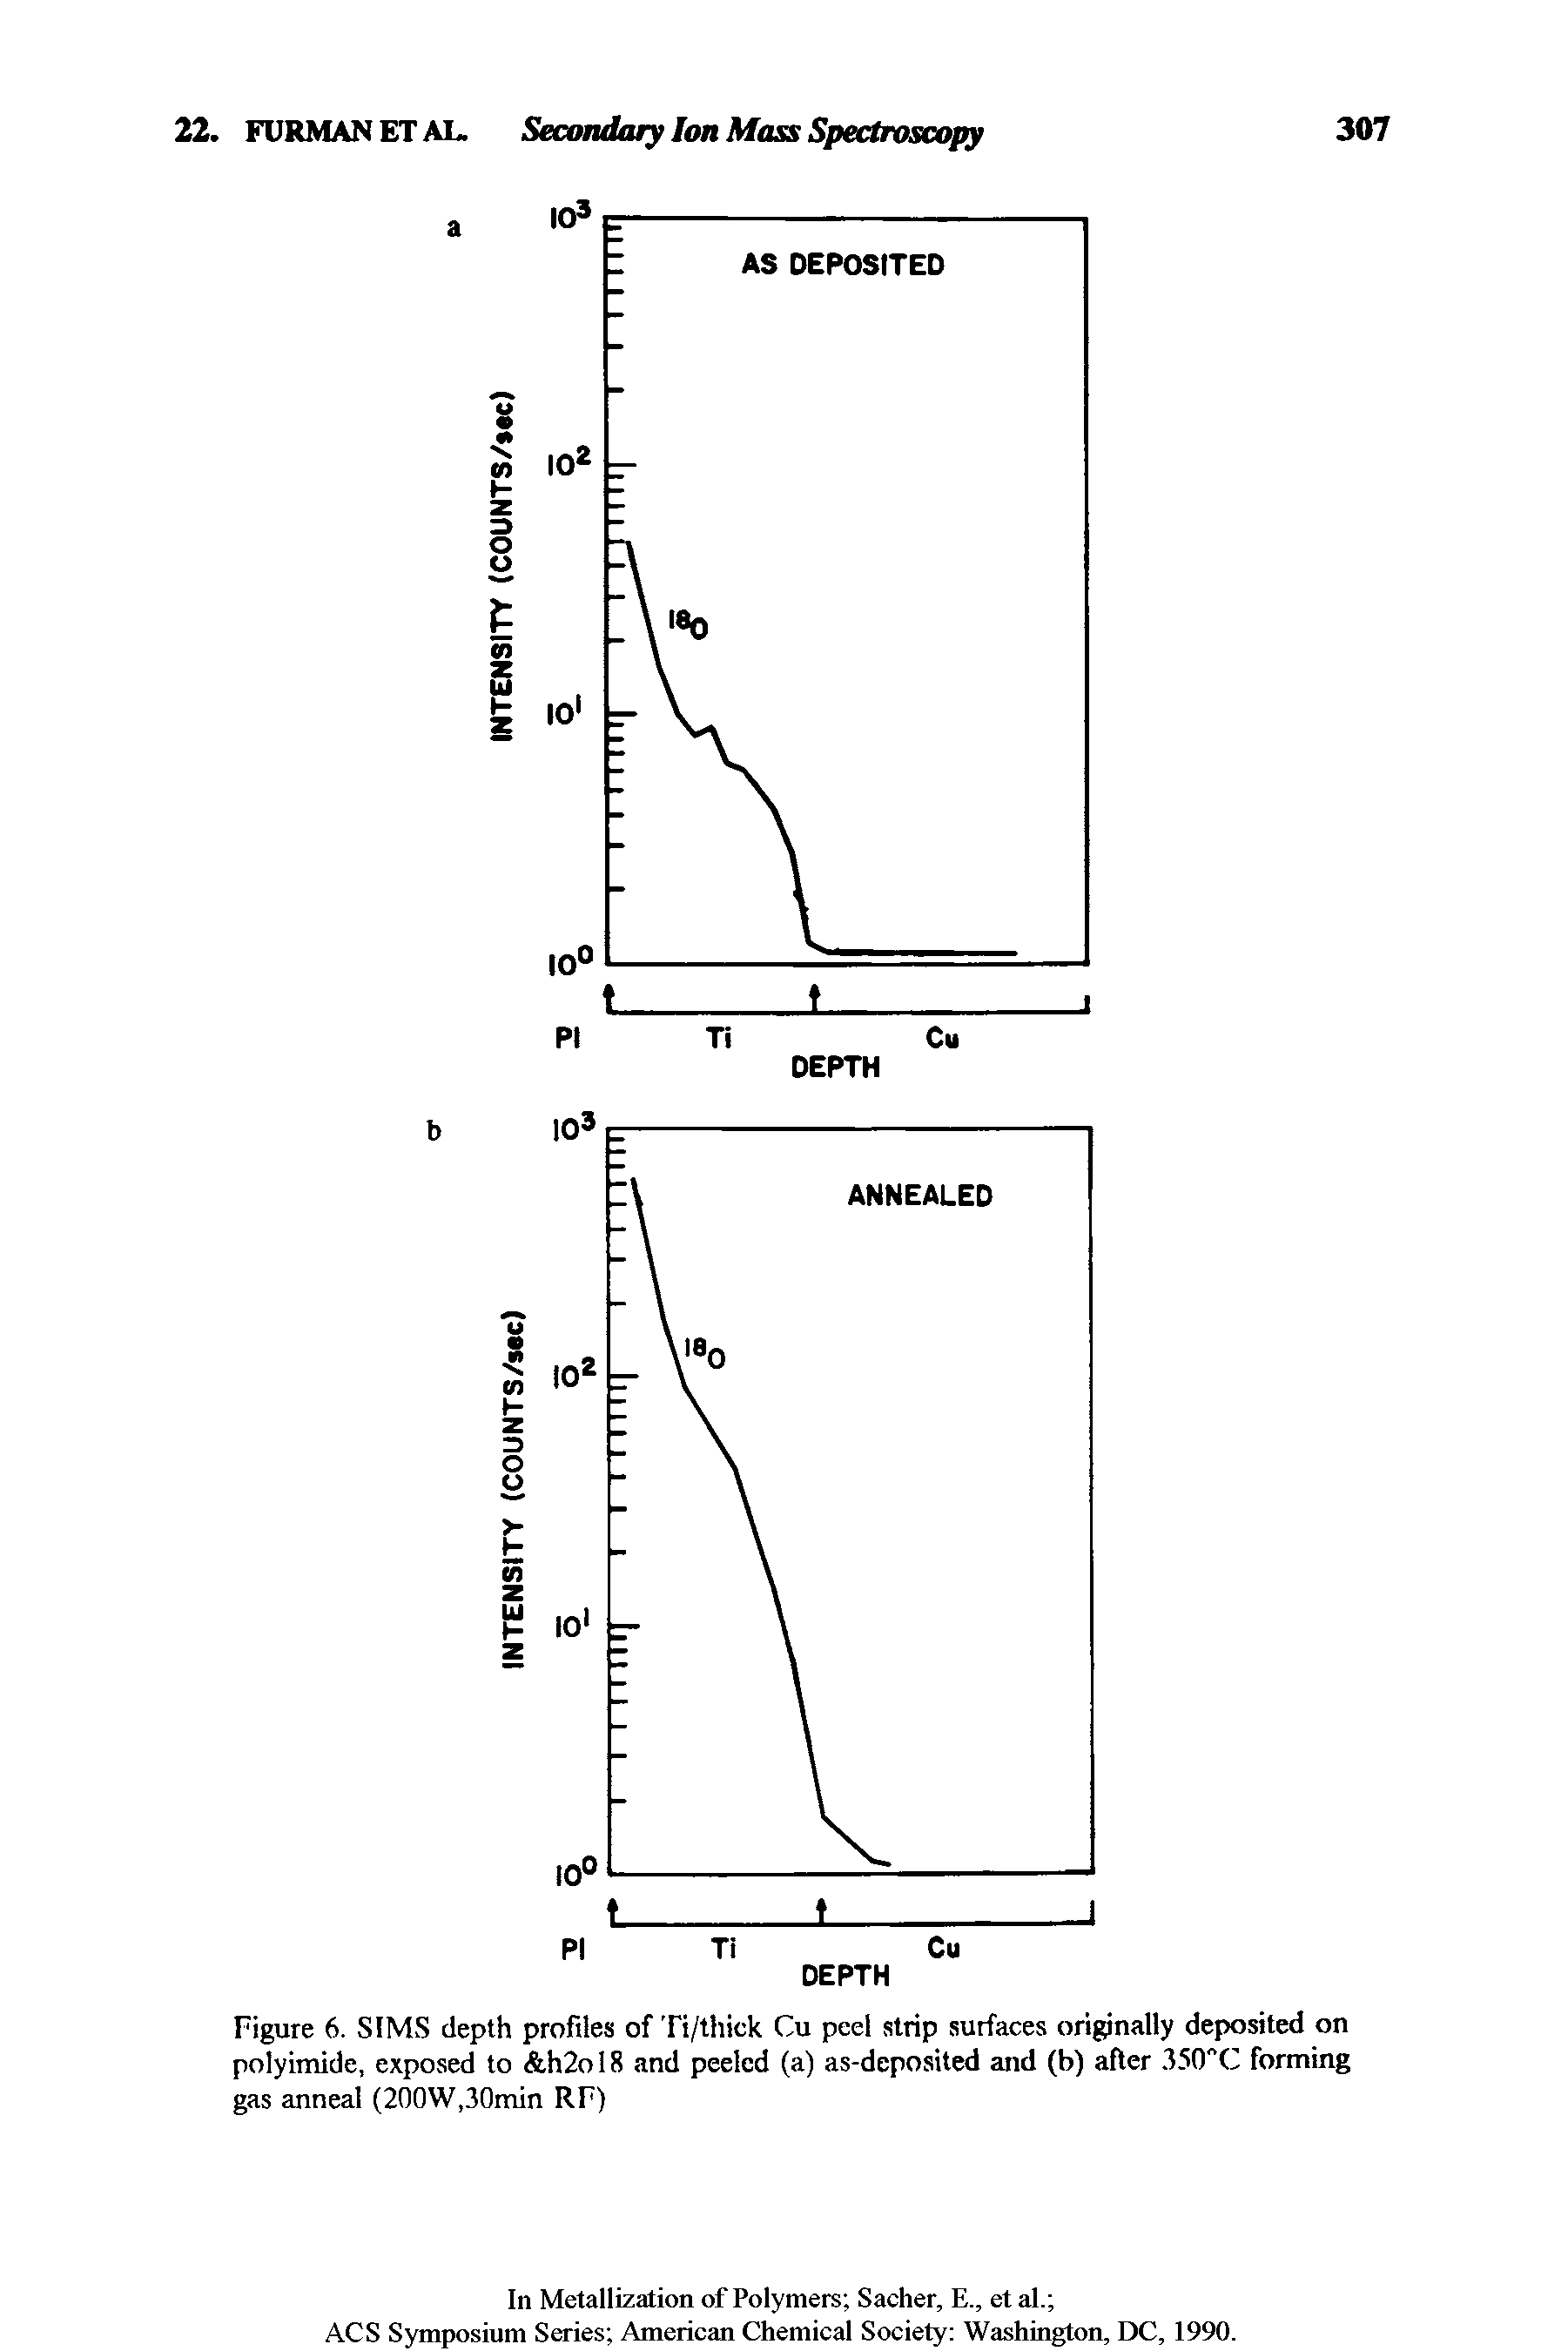 Figure 6. SIMS depth profiles of Ti/thick Cu peel strip surfaces originally deposited on polyimide, exposed to h2ol8 and peeled (a) as-deposited and (b) after 350"C forming gas anneal (200W,30min RF)...